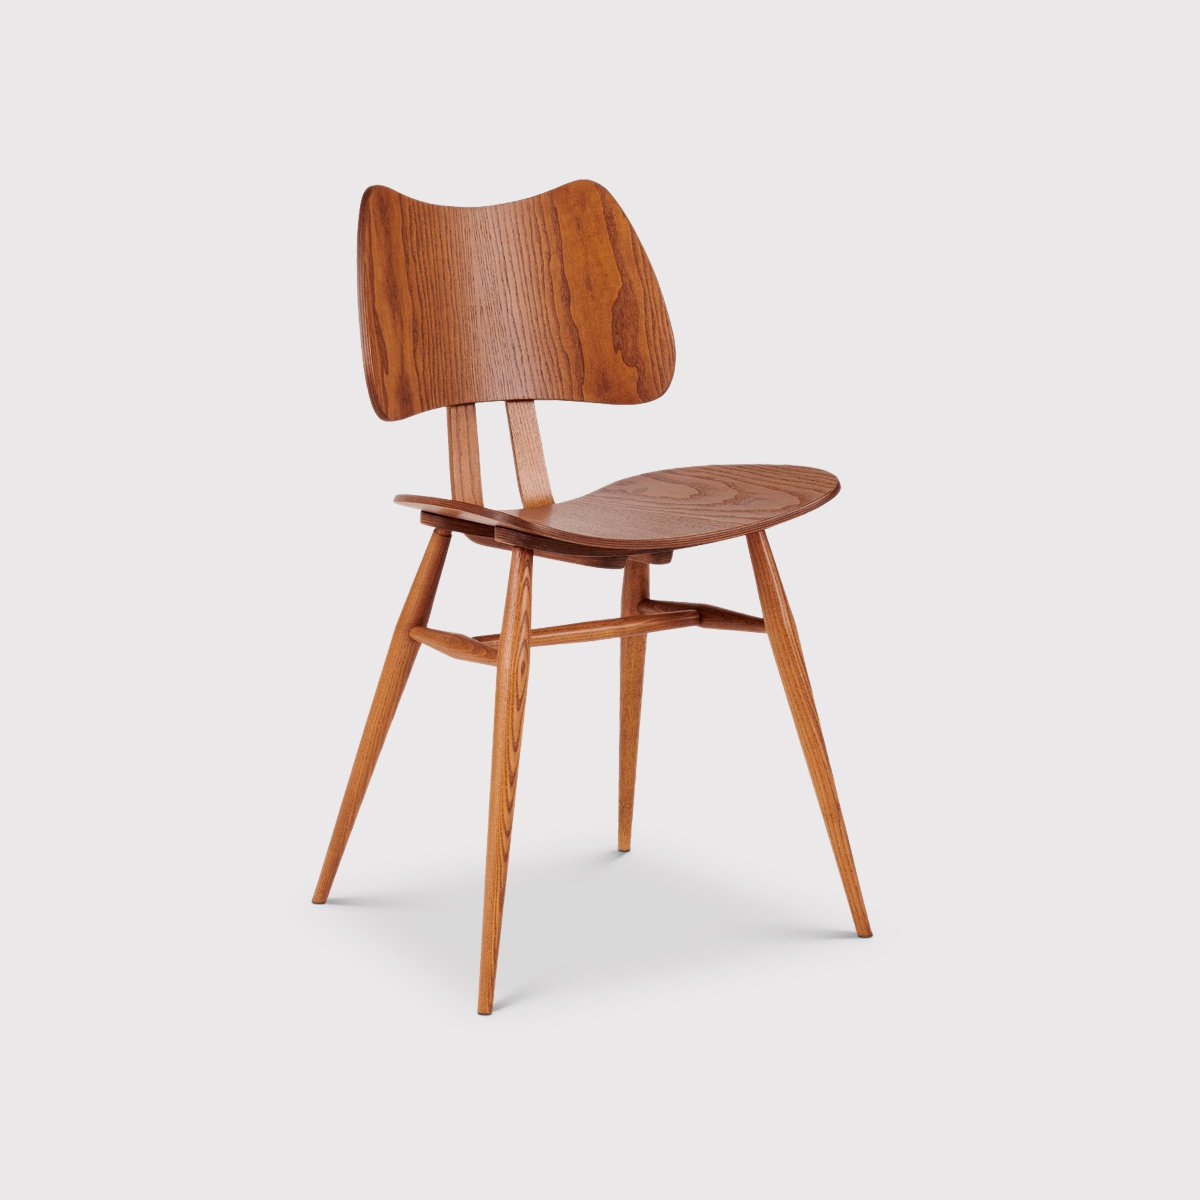 L.Ercolani Butterfly Dining Chair, Brown | Barker & Stonehouse